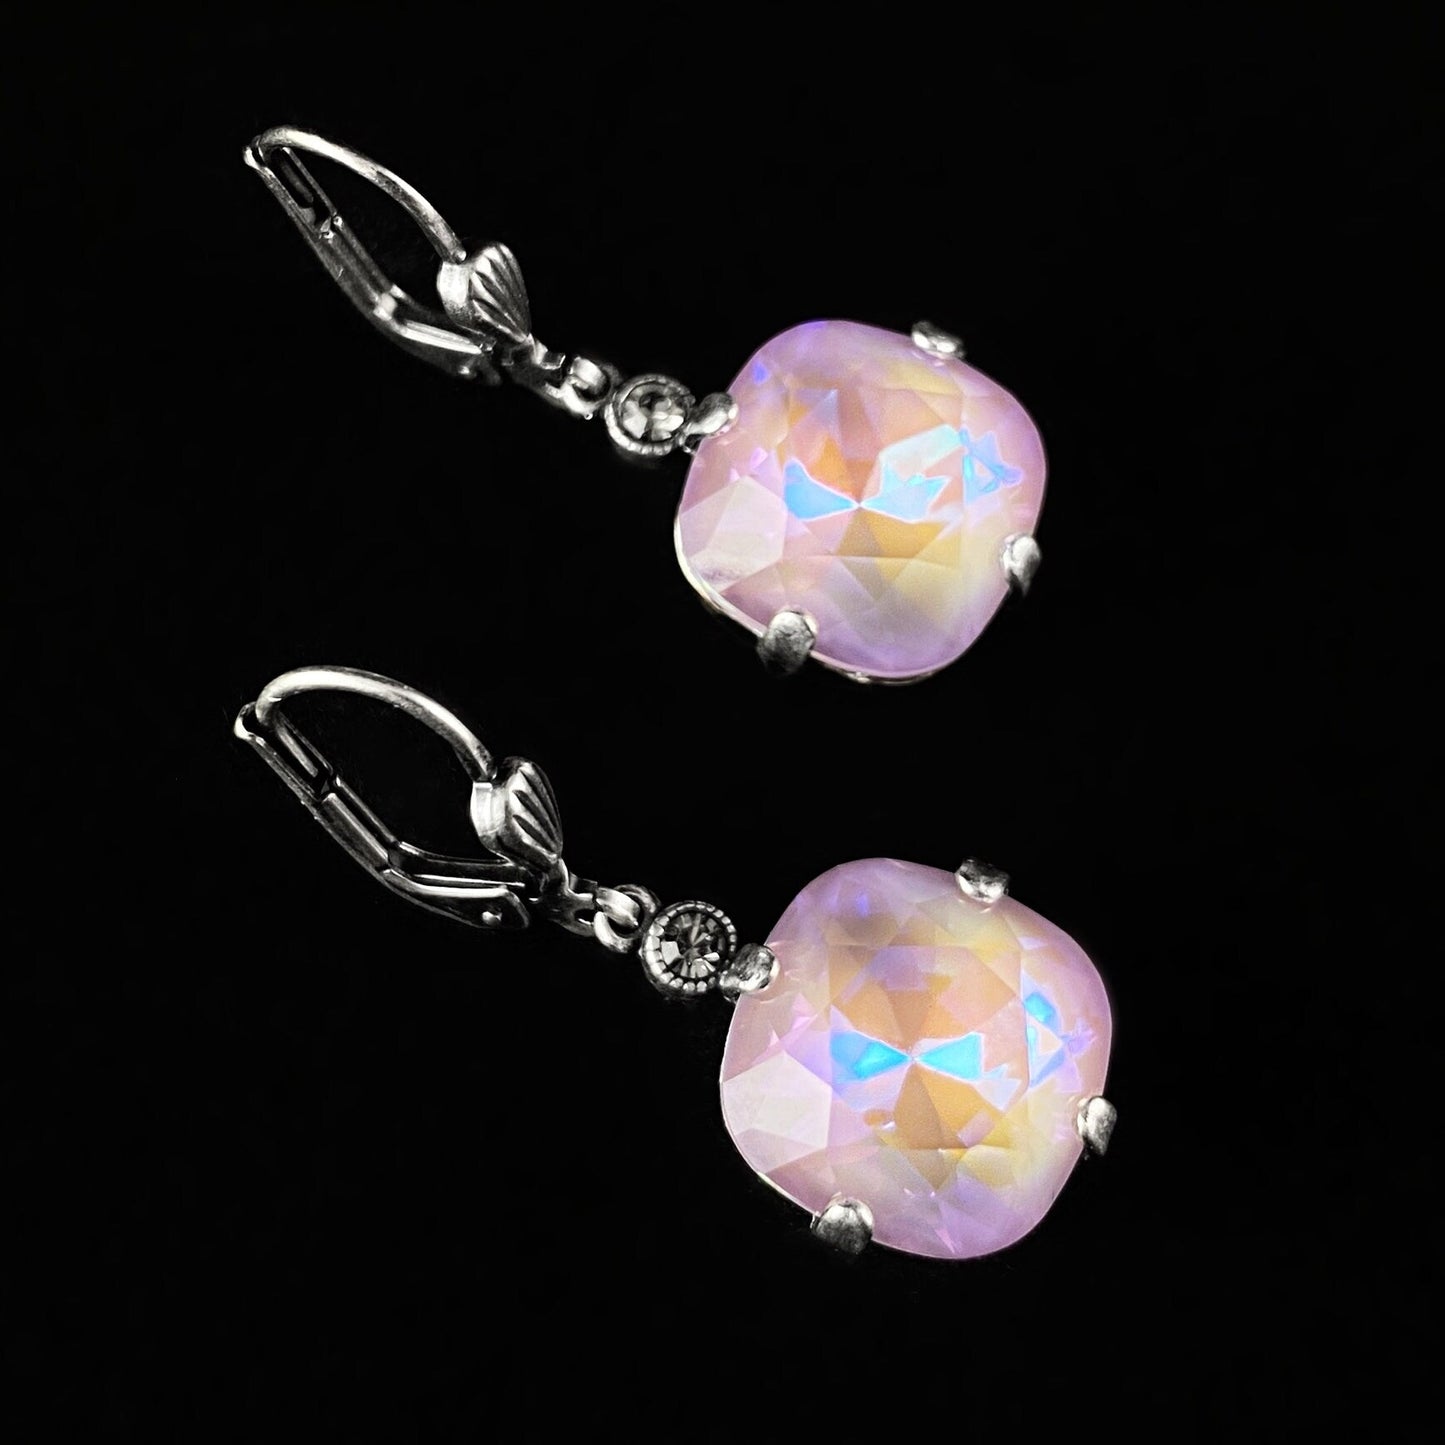 Cushion Cut Swarovski Crystal Drop Earrings, Cotton Candy Pink - La Vie Parisienne by Catherine Popesco